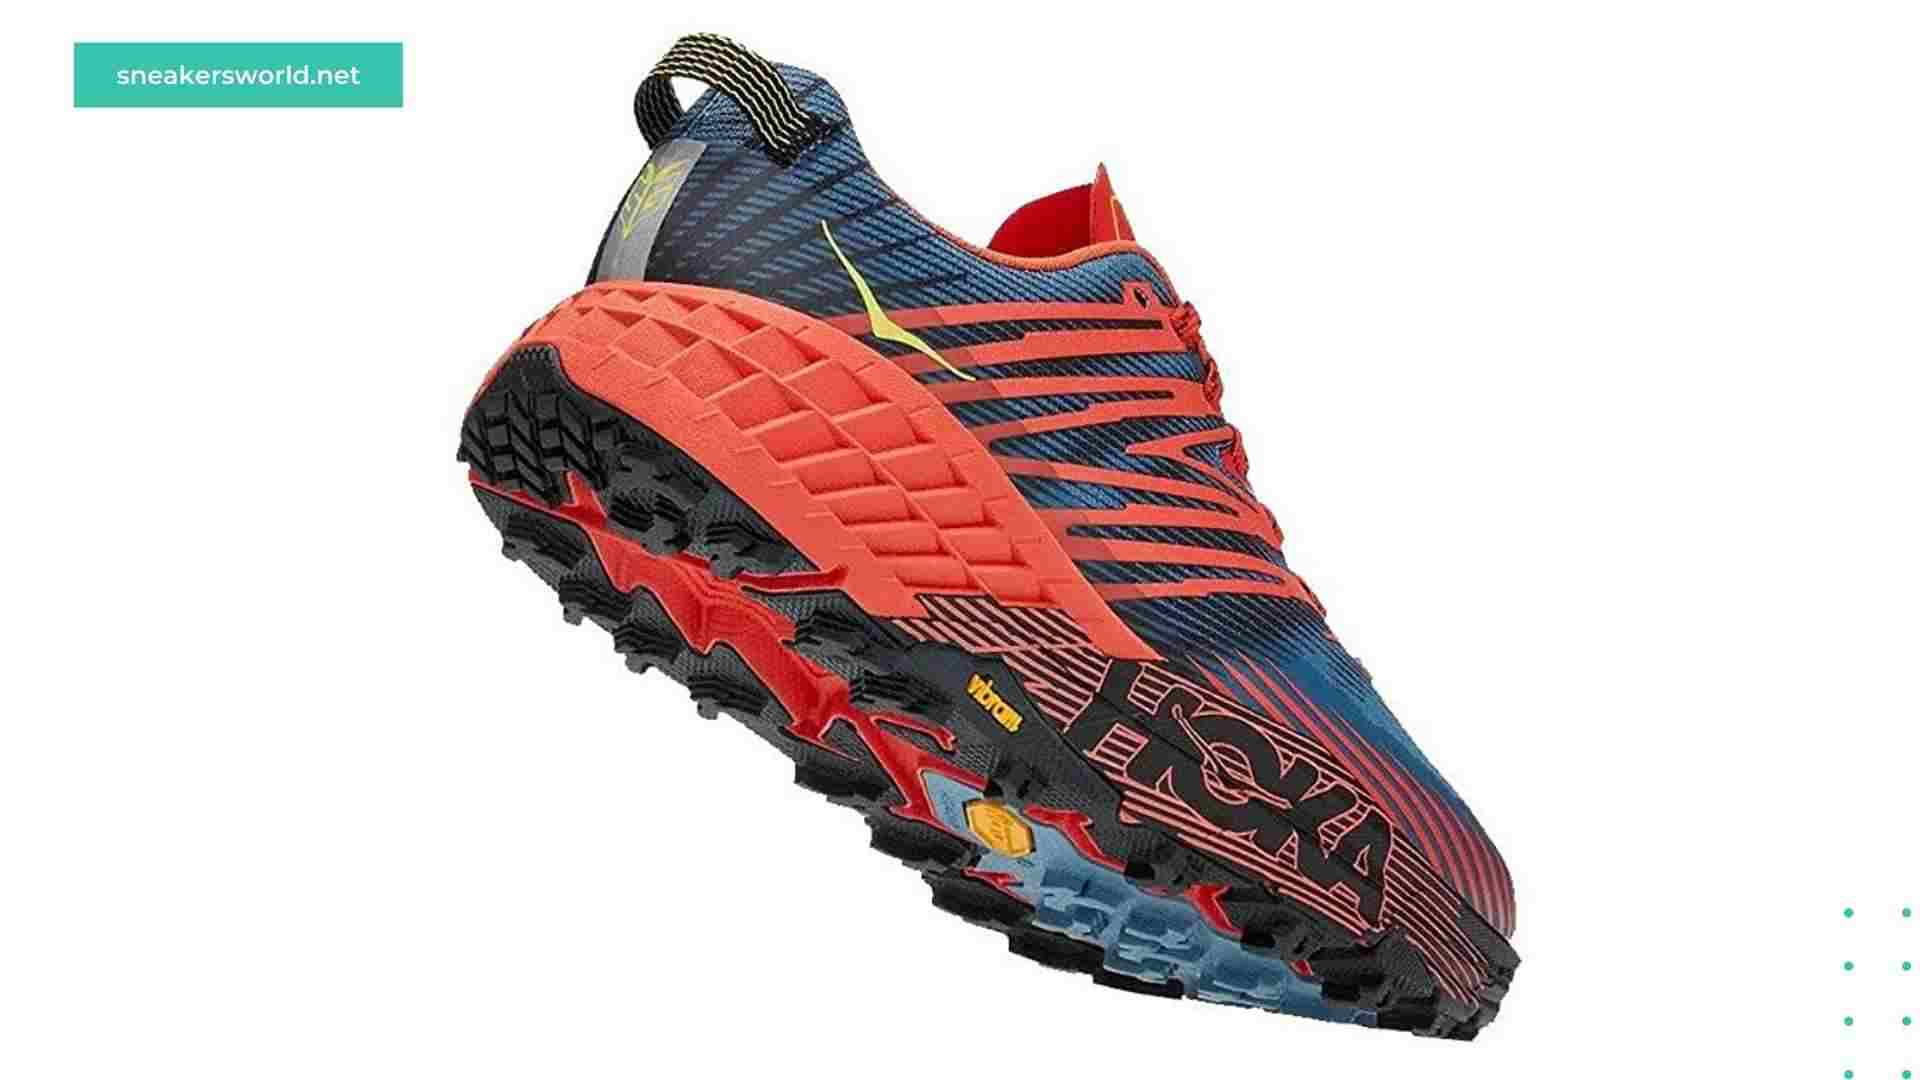 HOKA ONE ONE Mens Speedgoat 4 GTX Textile Synthetic Trainers - Best Ninja warrior shoes